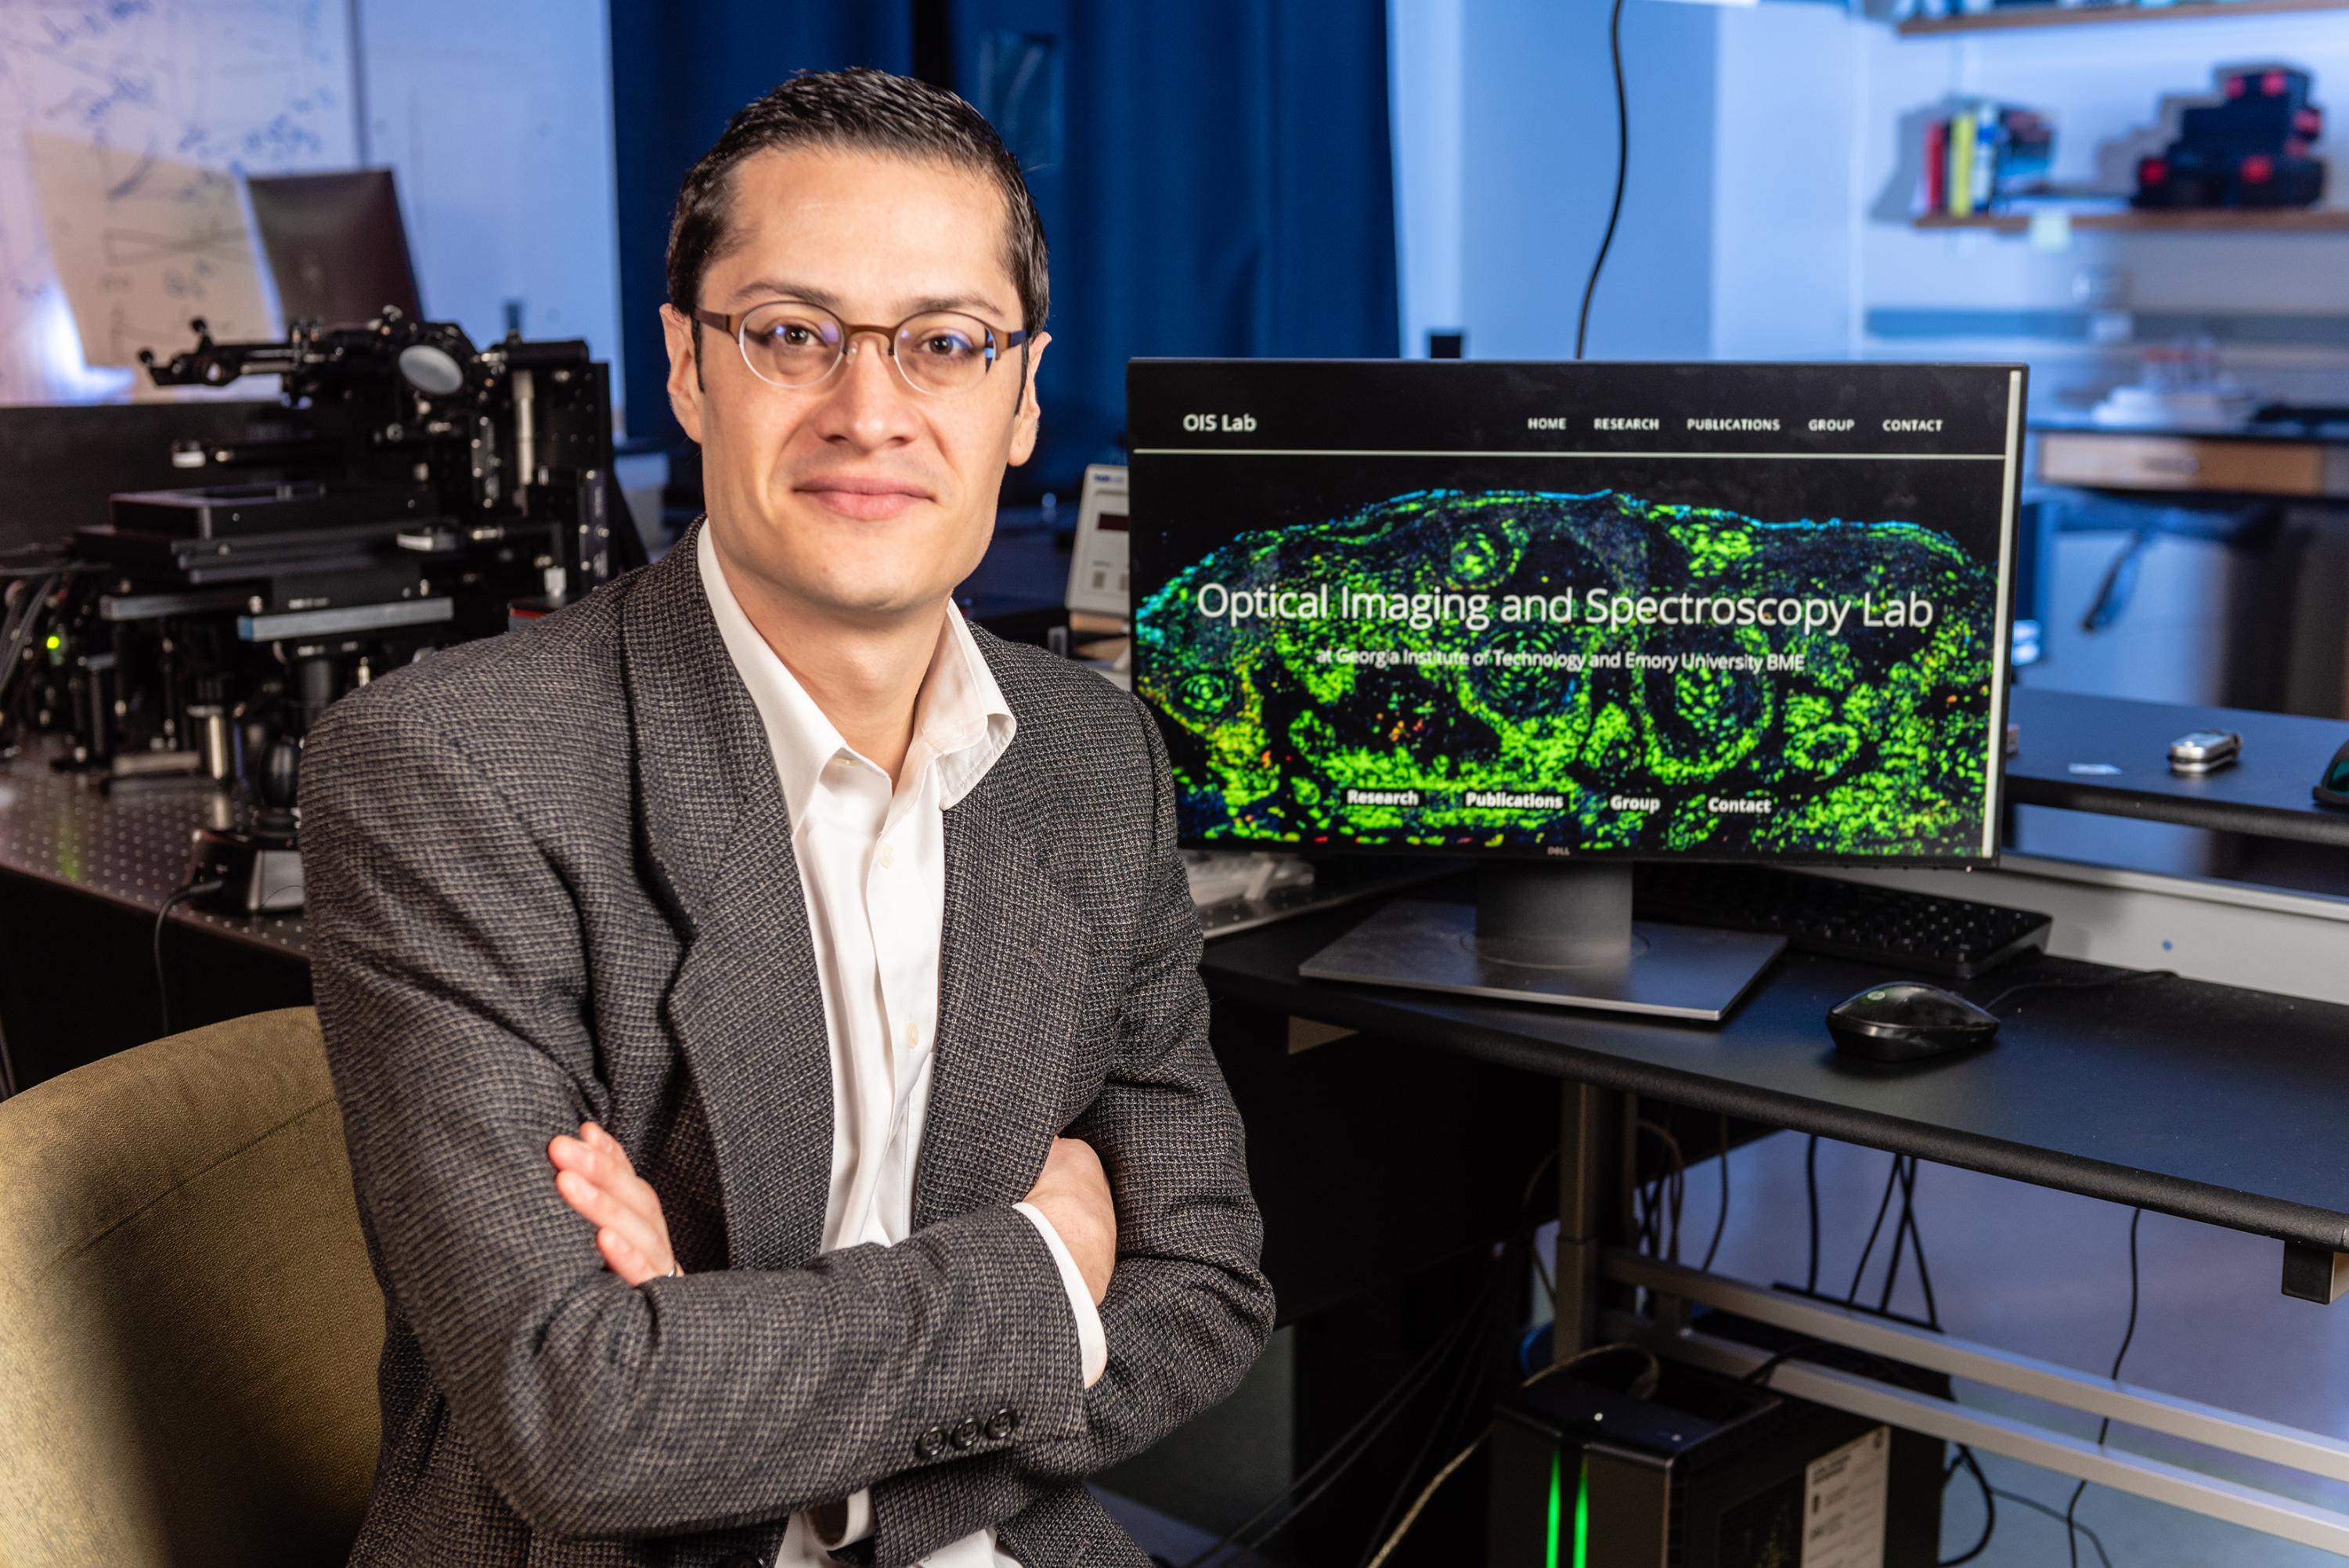 Dr. Francisco Robles, chief science officer of Cellia Science, Inc., sits at his desk in his lab at Georgia Tech. On the desk is a computer monitor with the words Optical Imaging and Spectroscopy Lab displayed.  